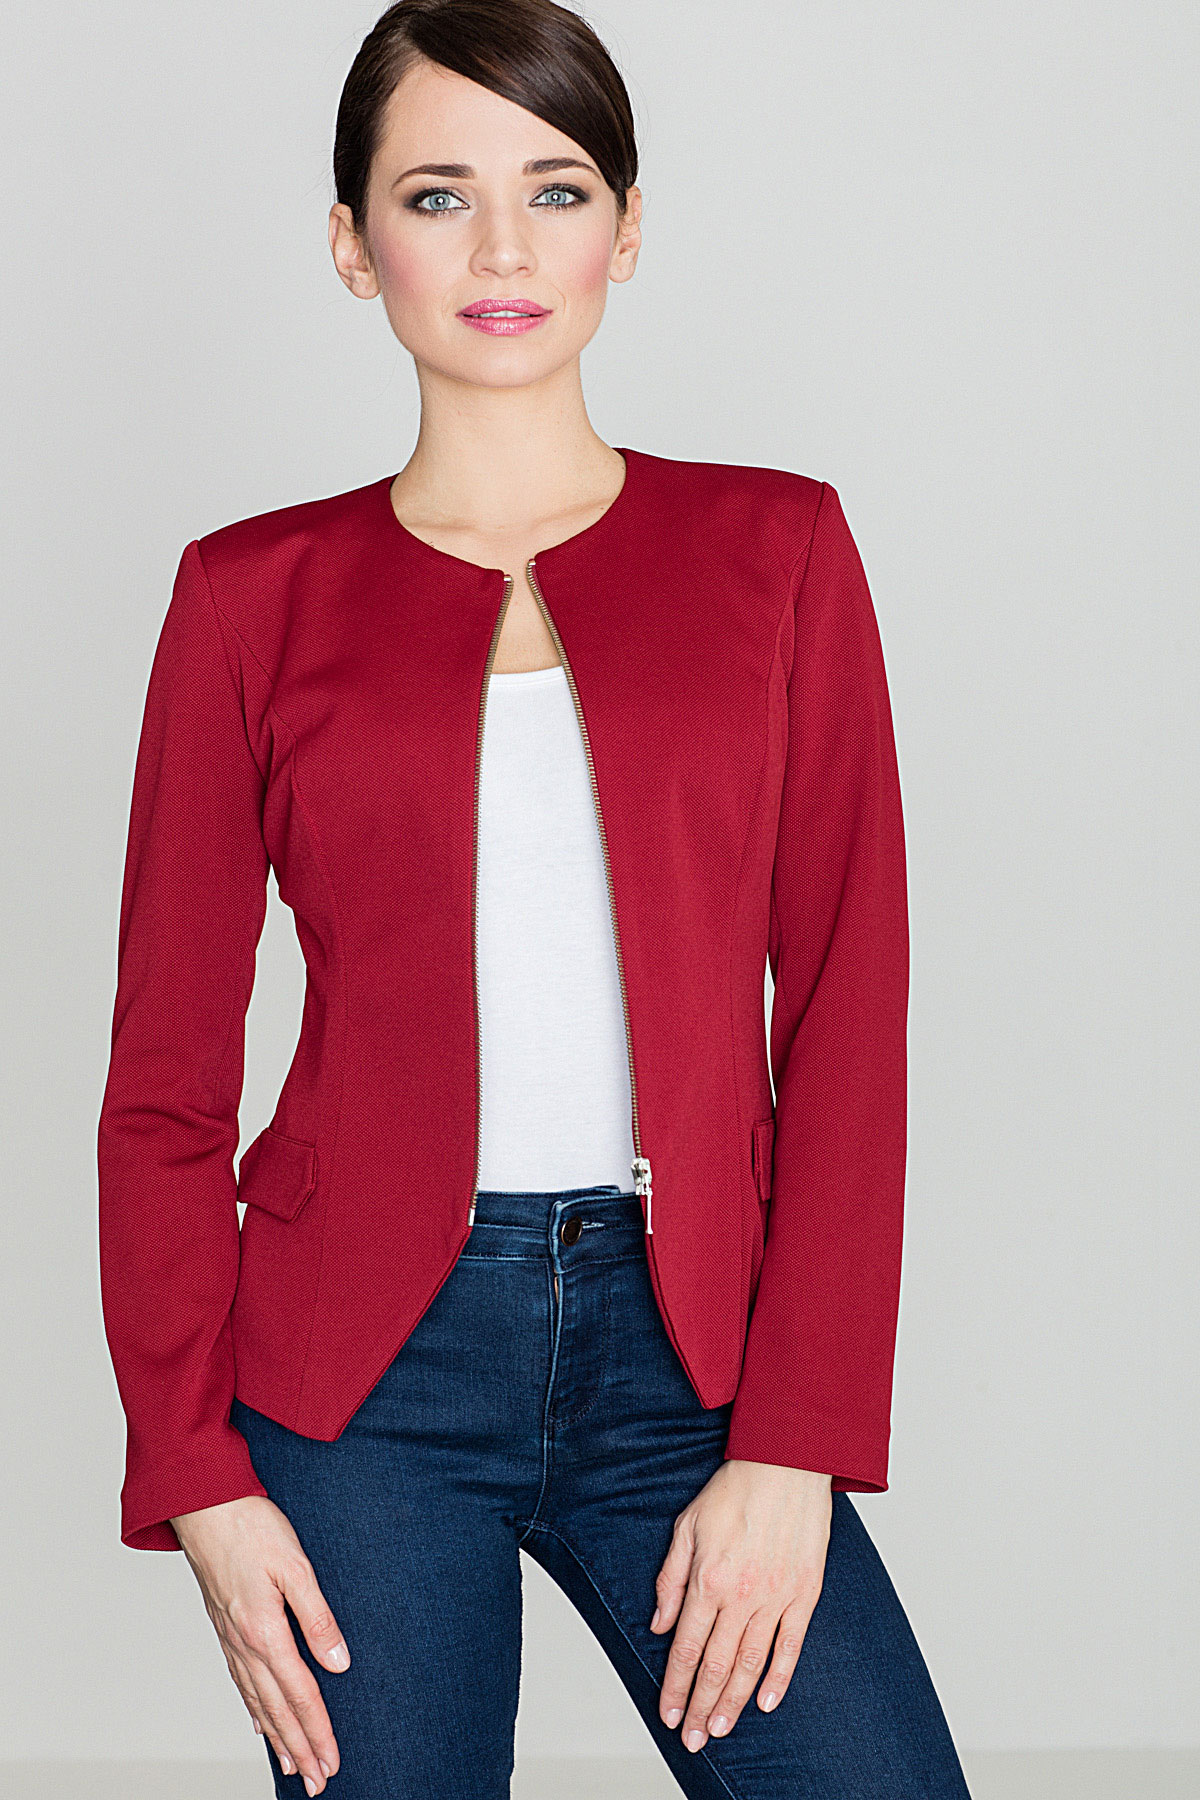 Burgundy fitted jacket, in pique knit, for women